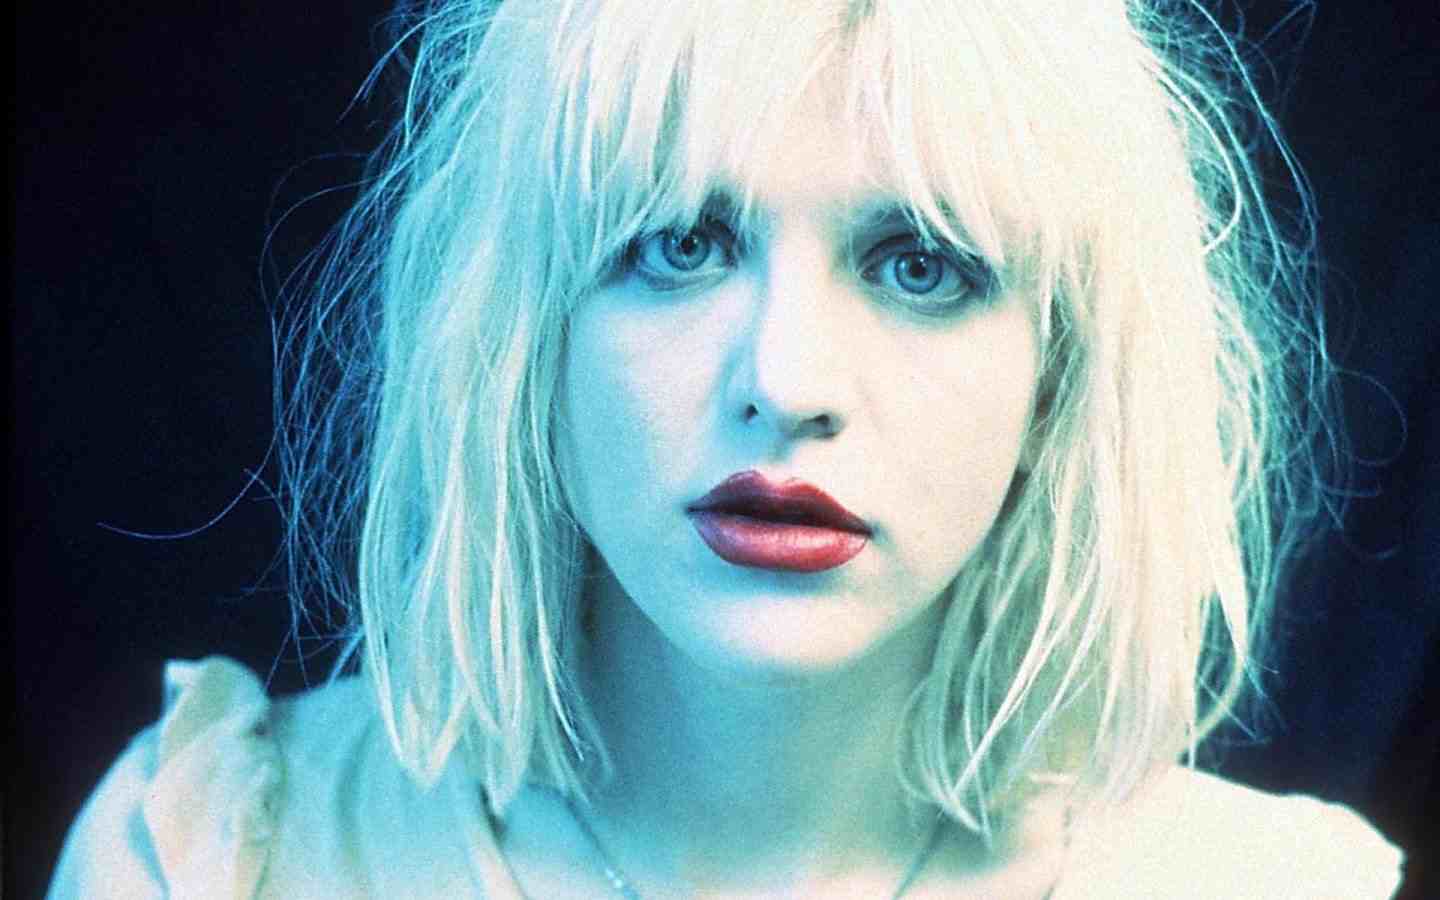 Courtney Love Joins The Lemonheads on Stage in London For Performance of 'Into Your Arms'